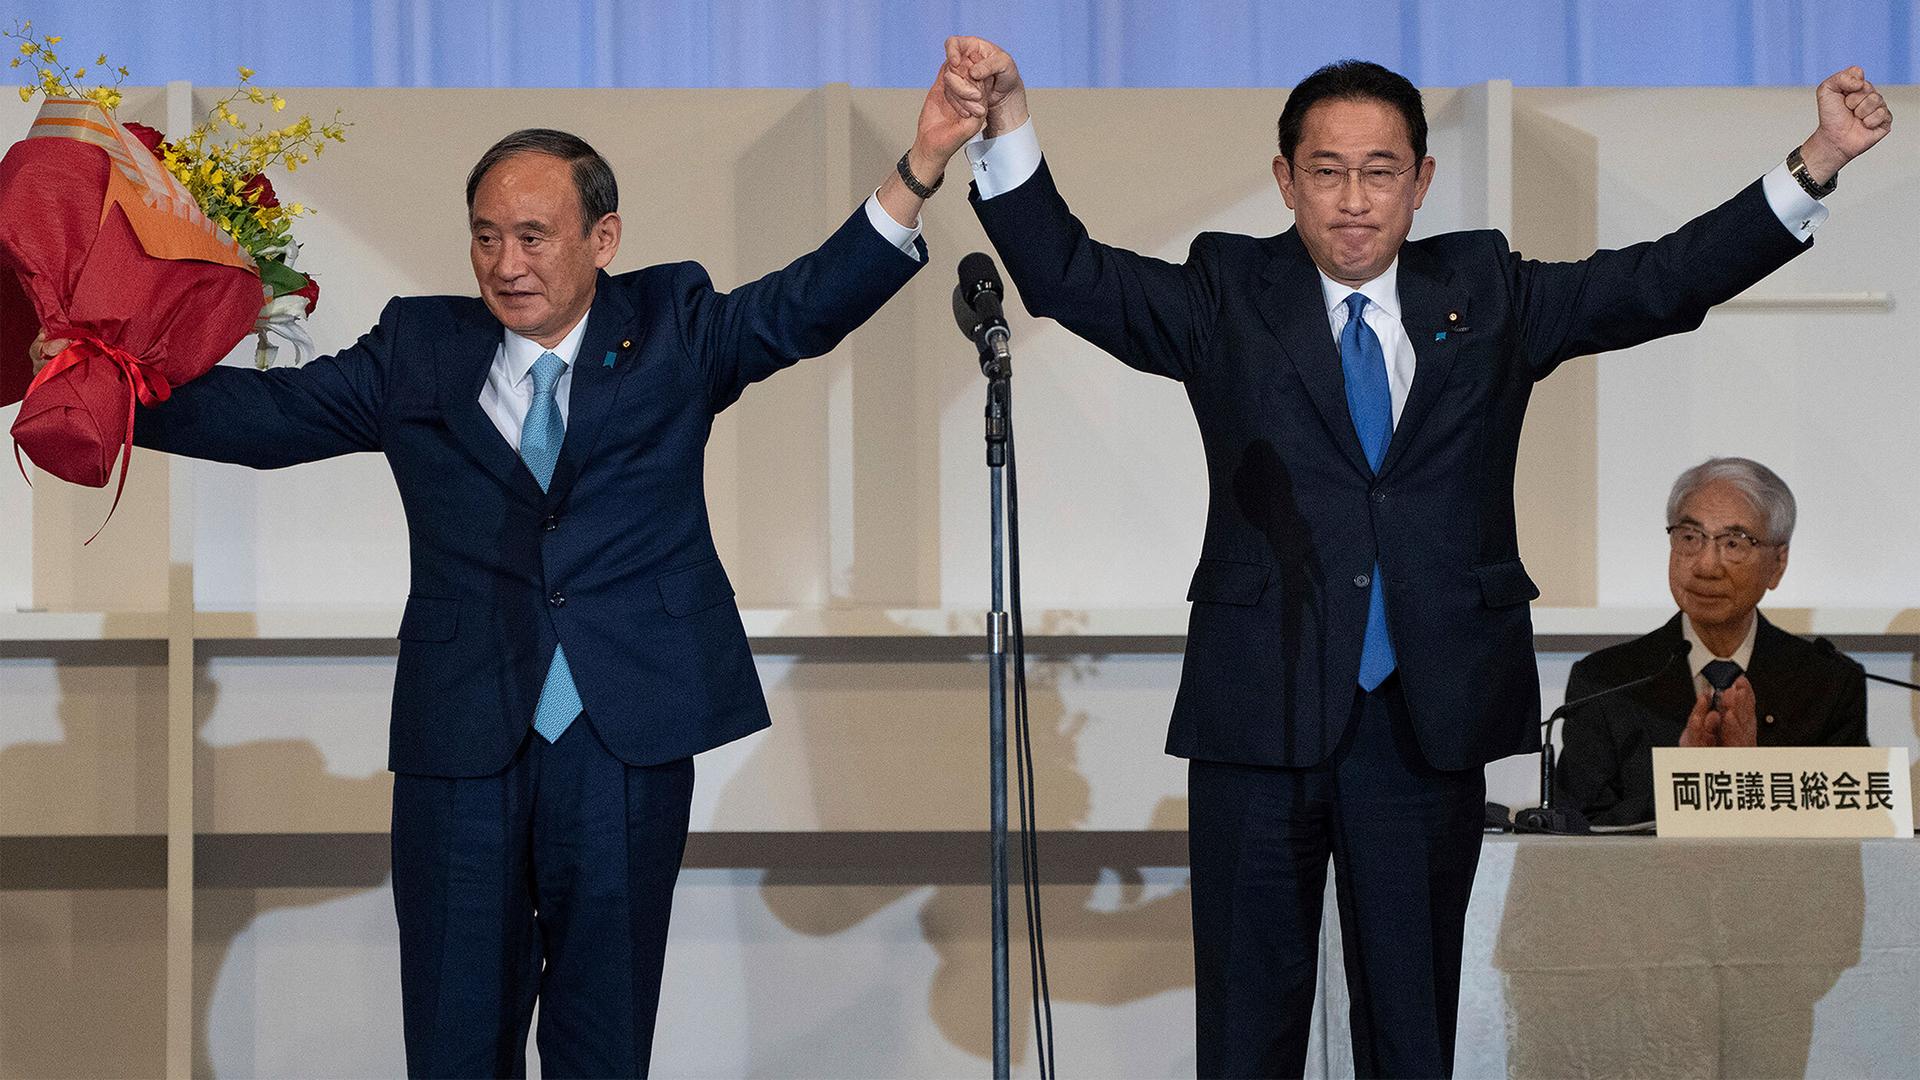 Fumio Kishida, right, is shown with his arms raised celebrating with Yoshihide Suga who is standing next to him.